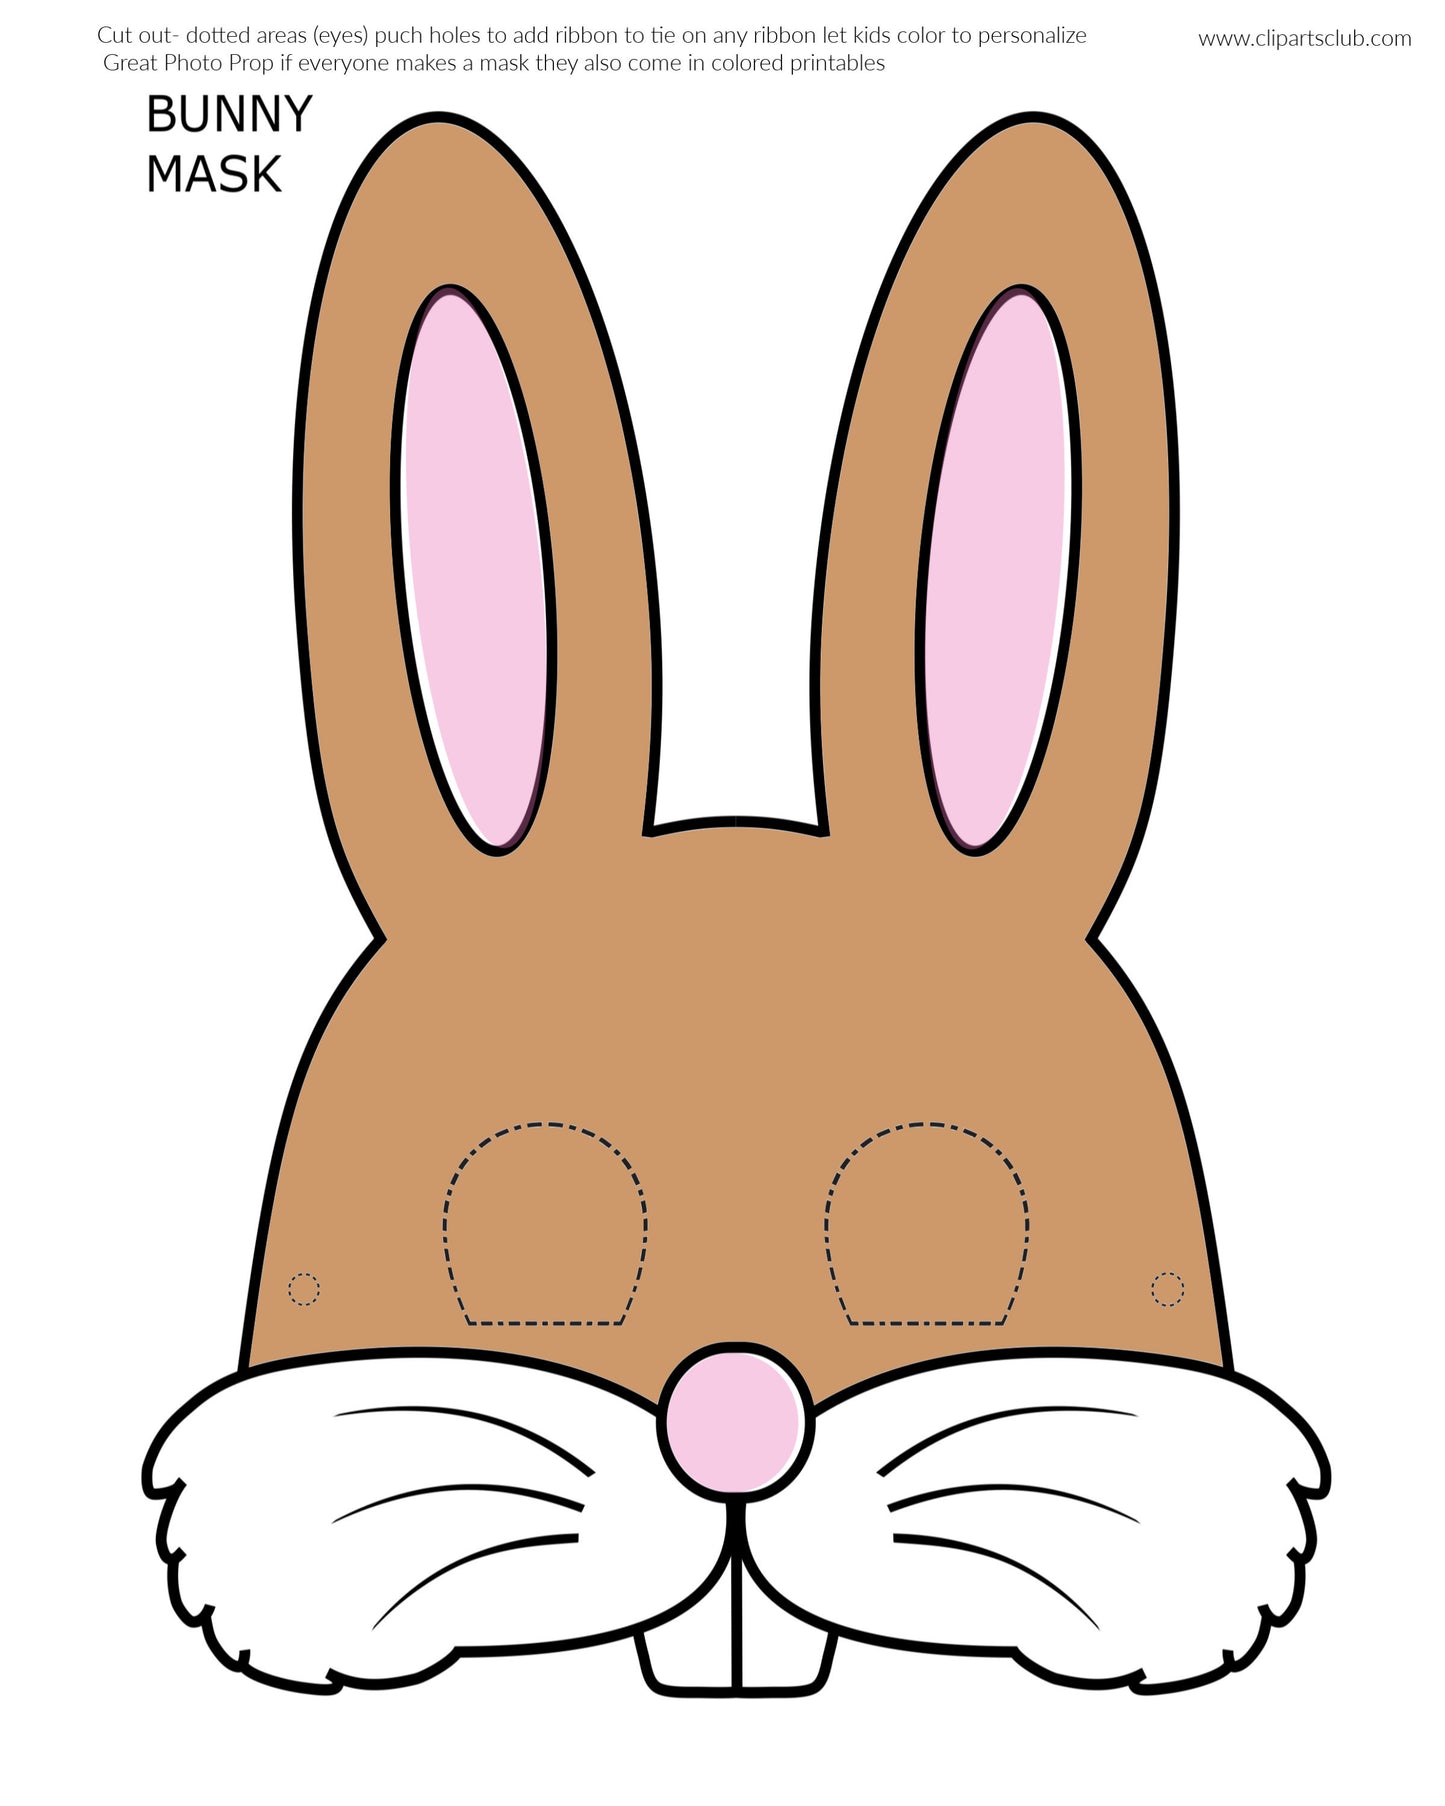 3  Different Brown Easter Bunnies DIY Kids Craft Mask for Easter-SCROLL TO SEE THEM ALL